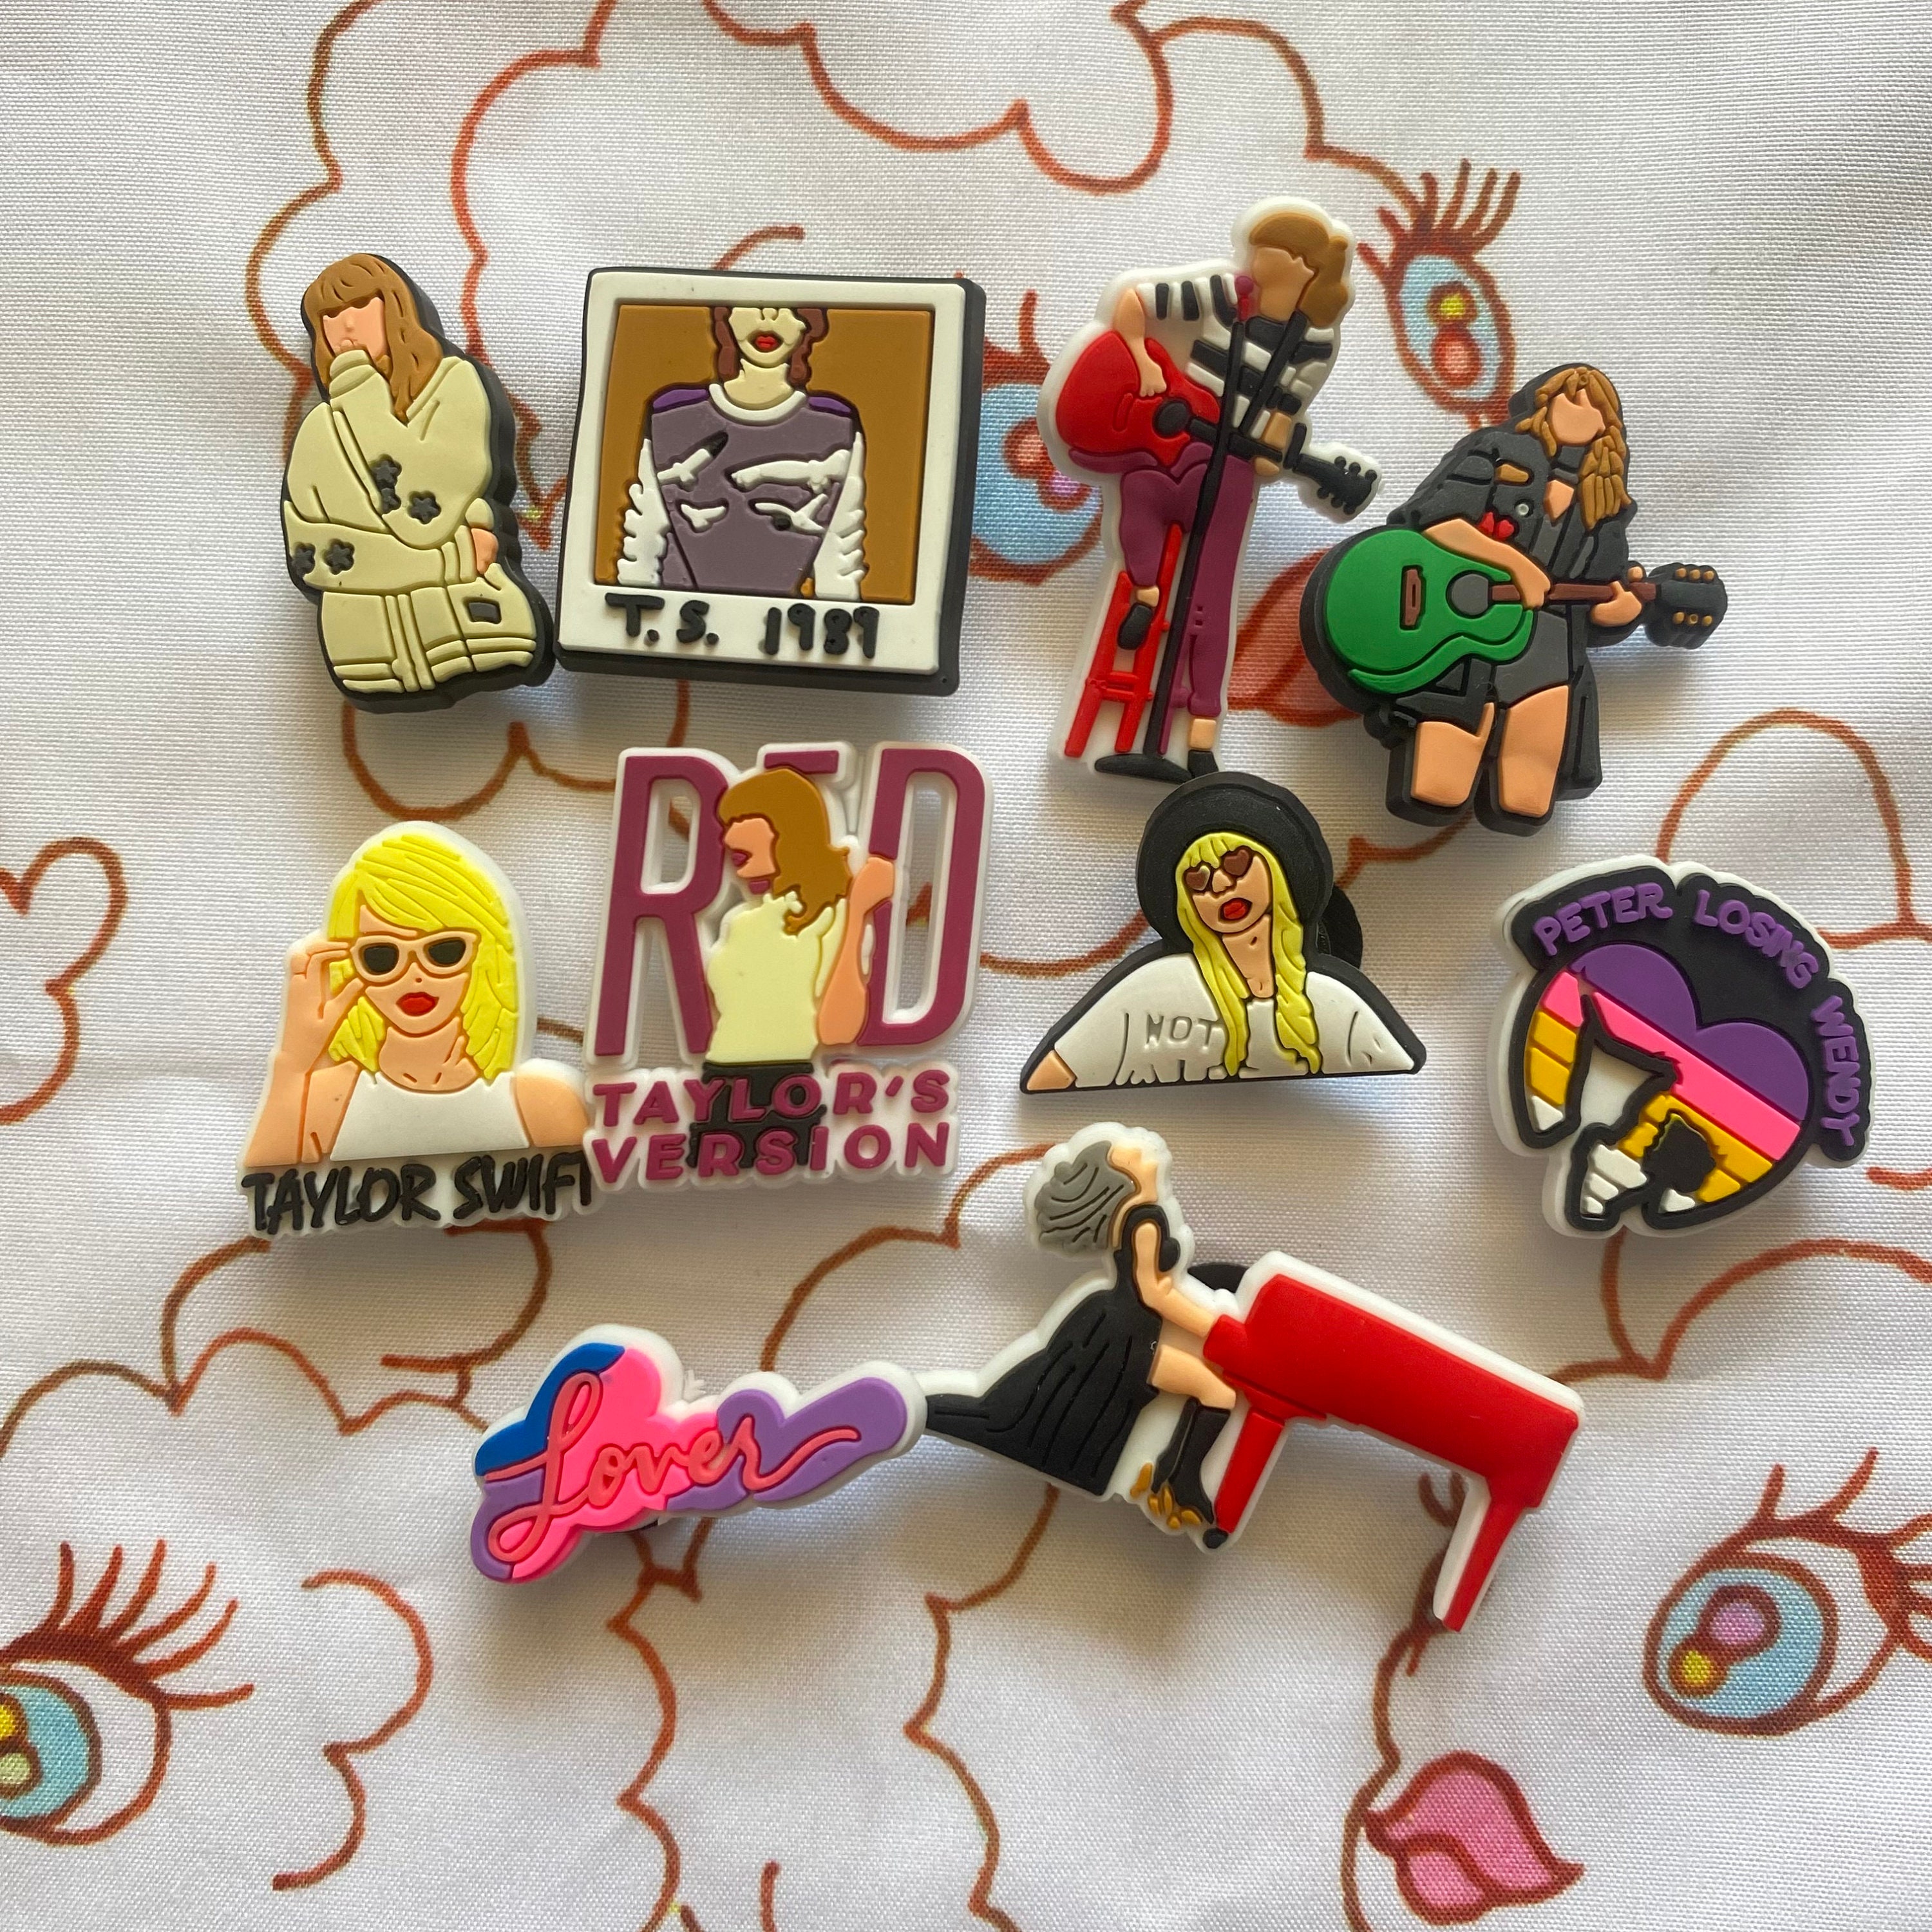 Taylor Swift Croc Charms - Charms & Pendants - Kingston, Ontario, Facebook  Marketplace